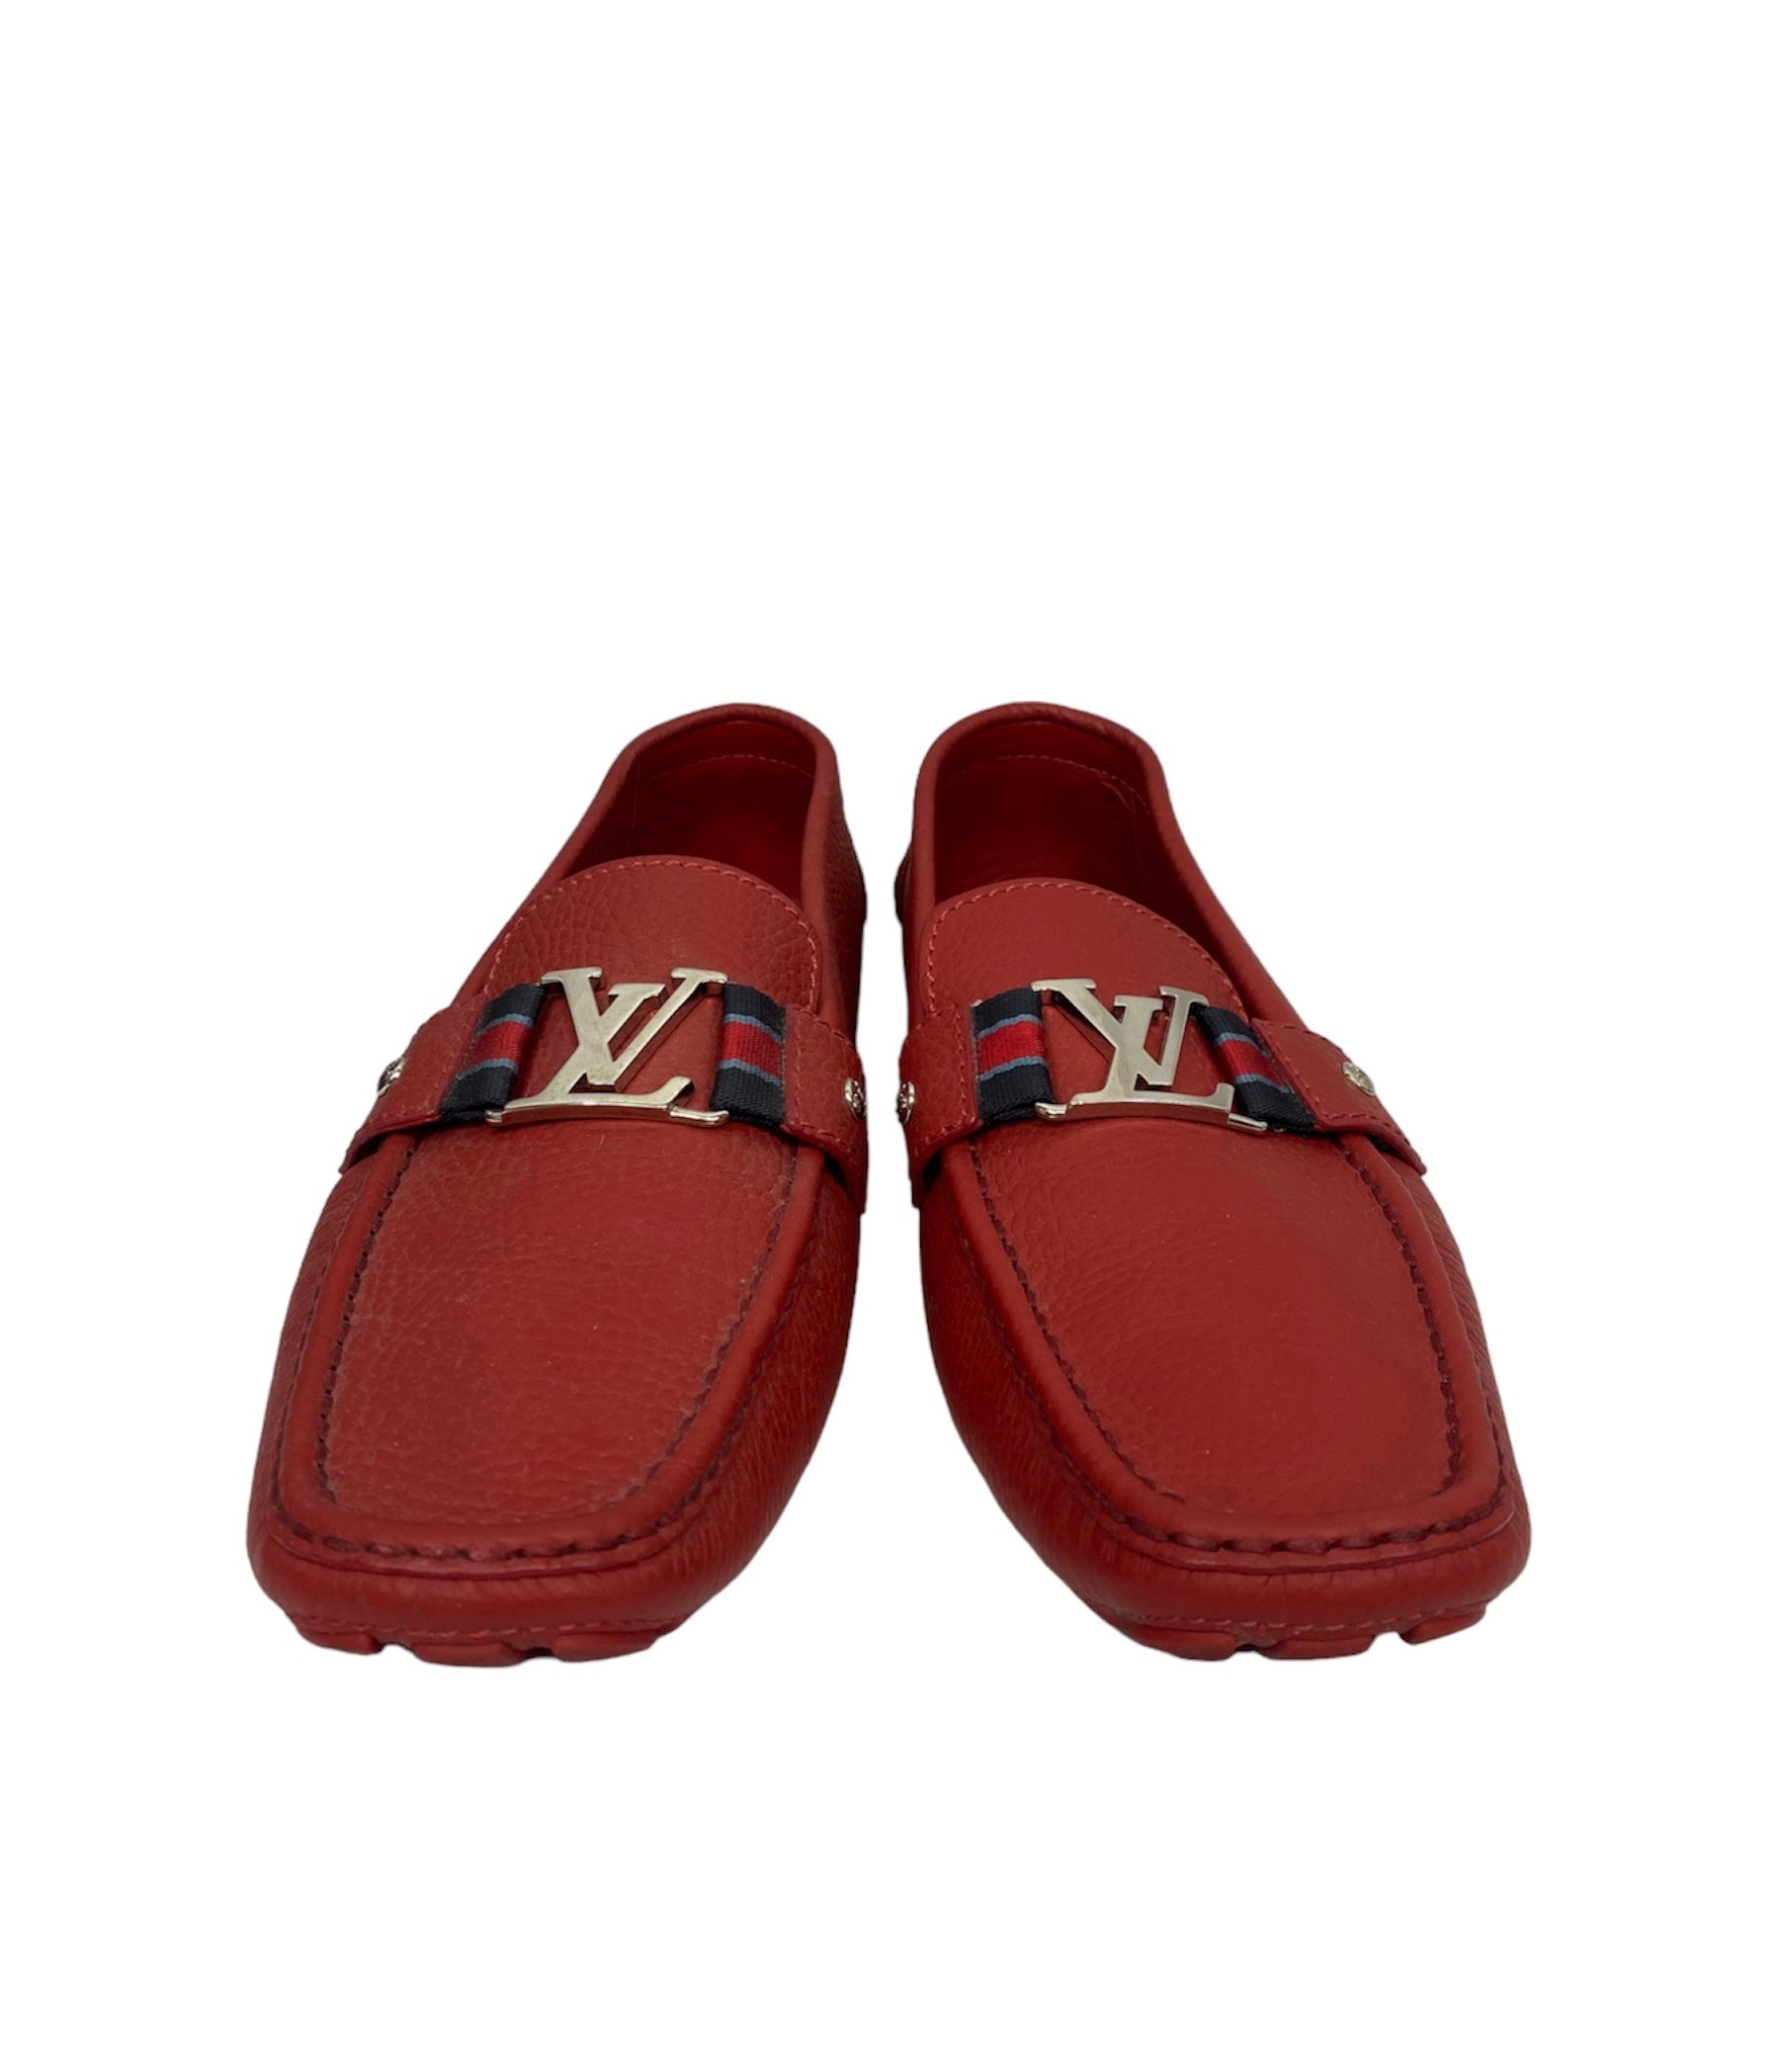 Authentic Louis Vuitton Men's Shade Car Shoes Casual Red Loafers